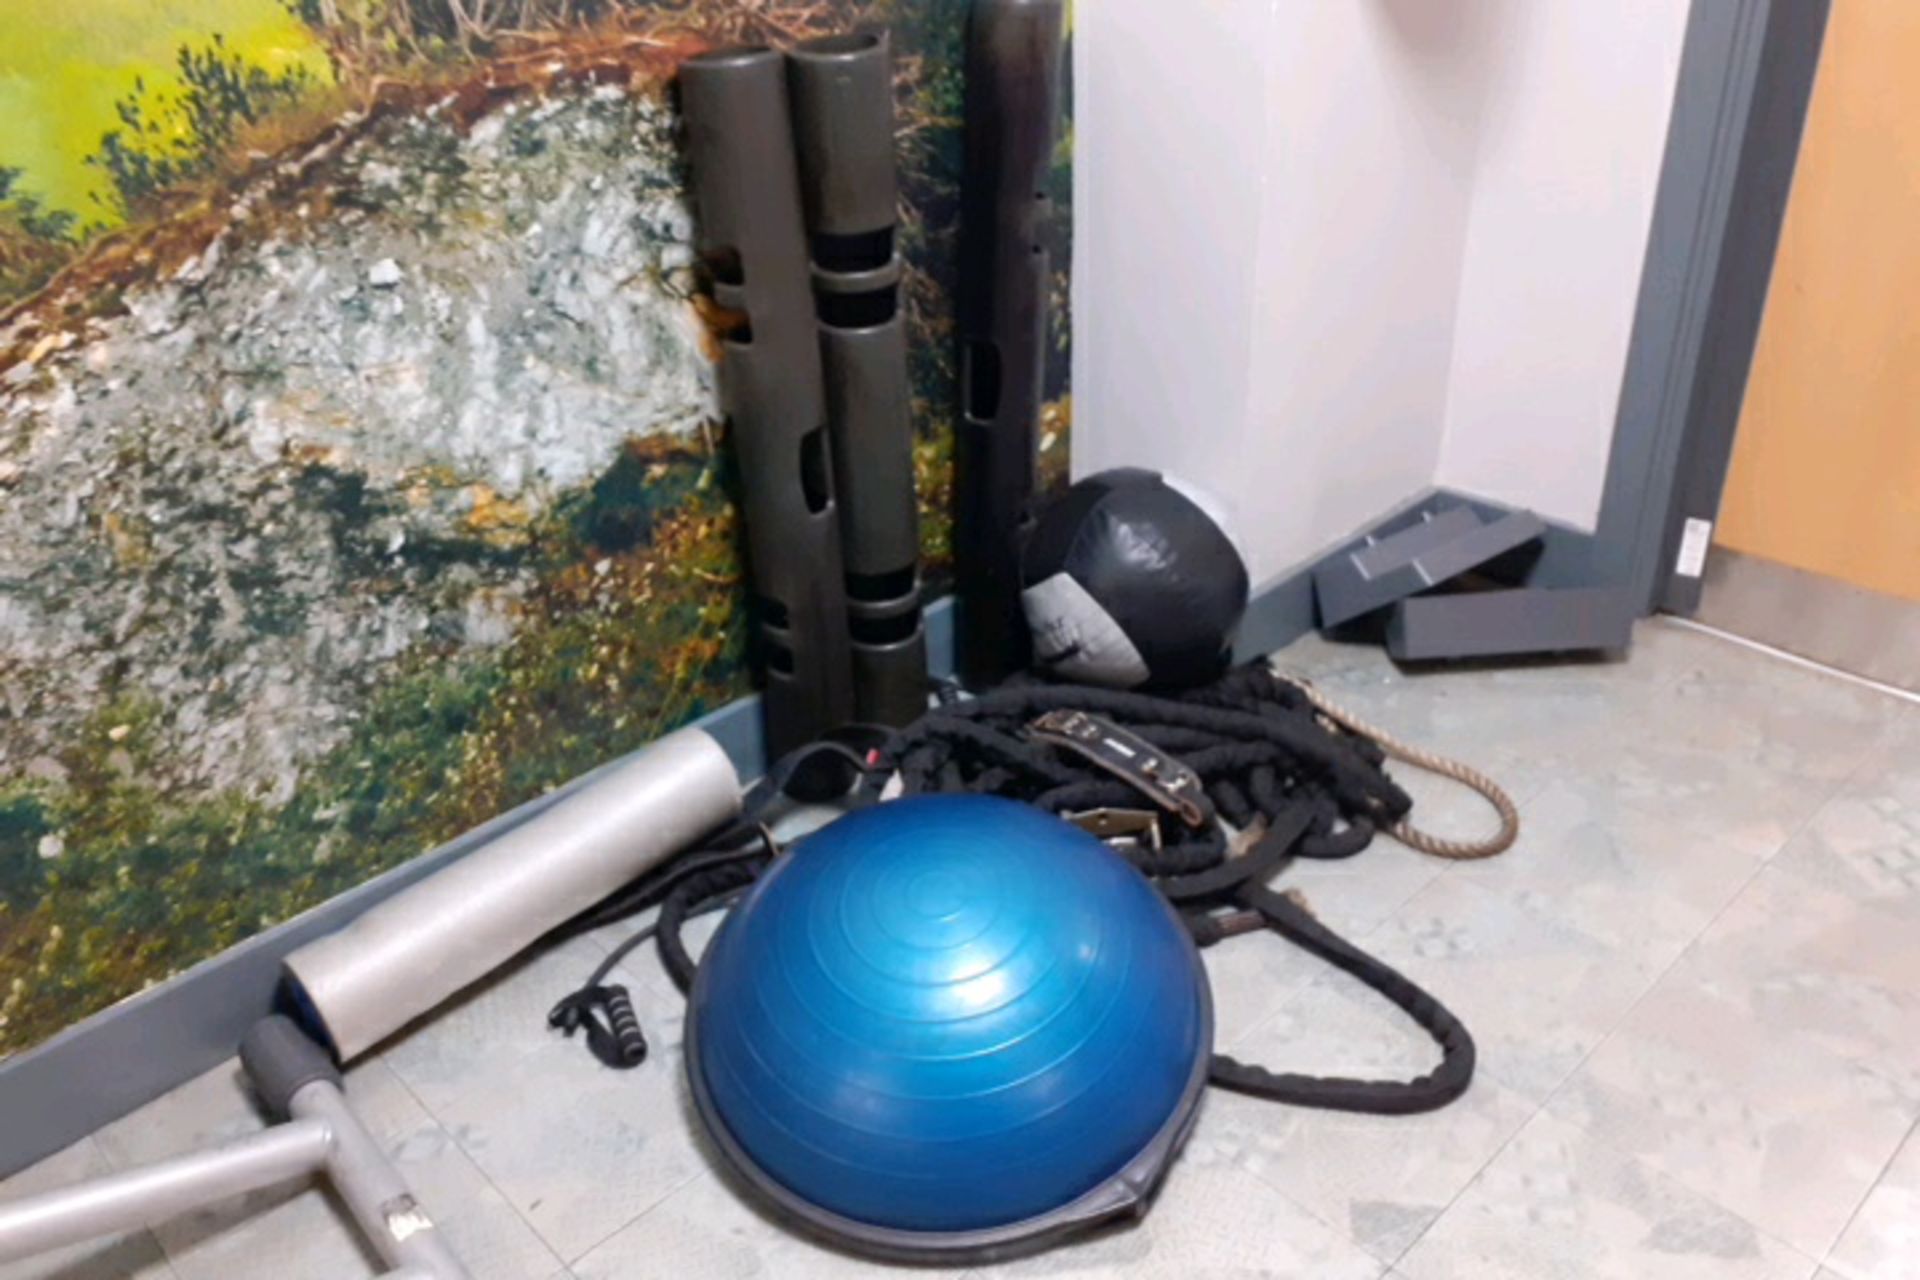 Exercise equipment - Image 3 of 3